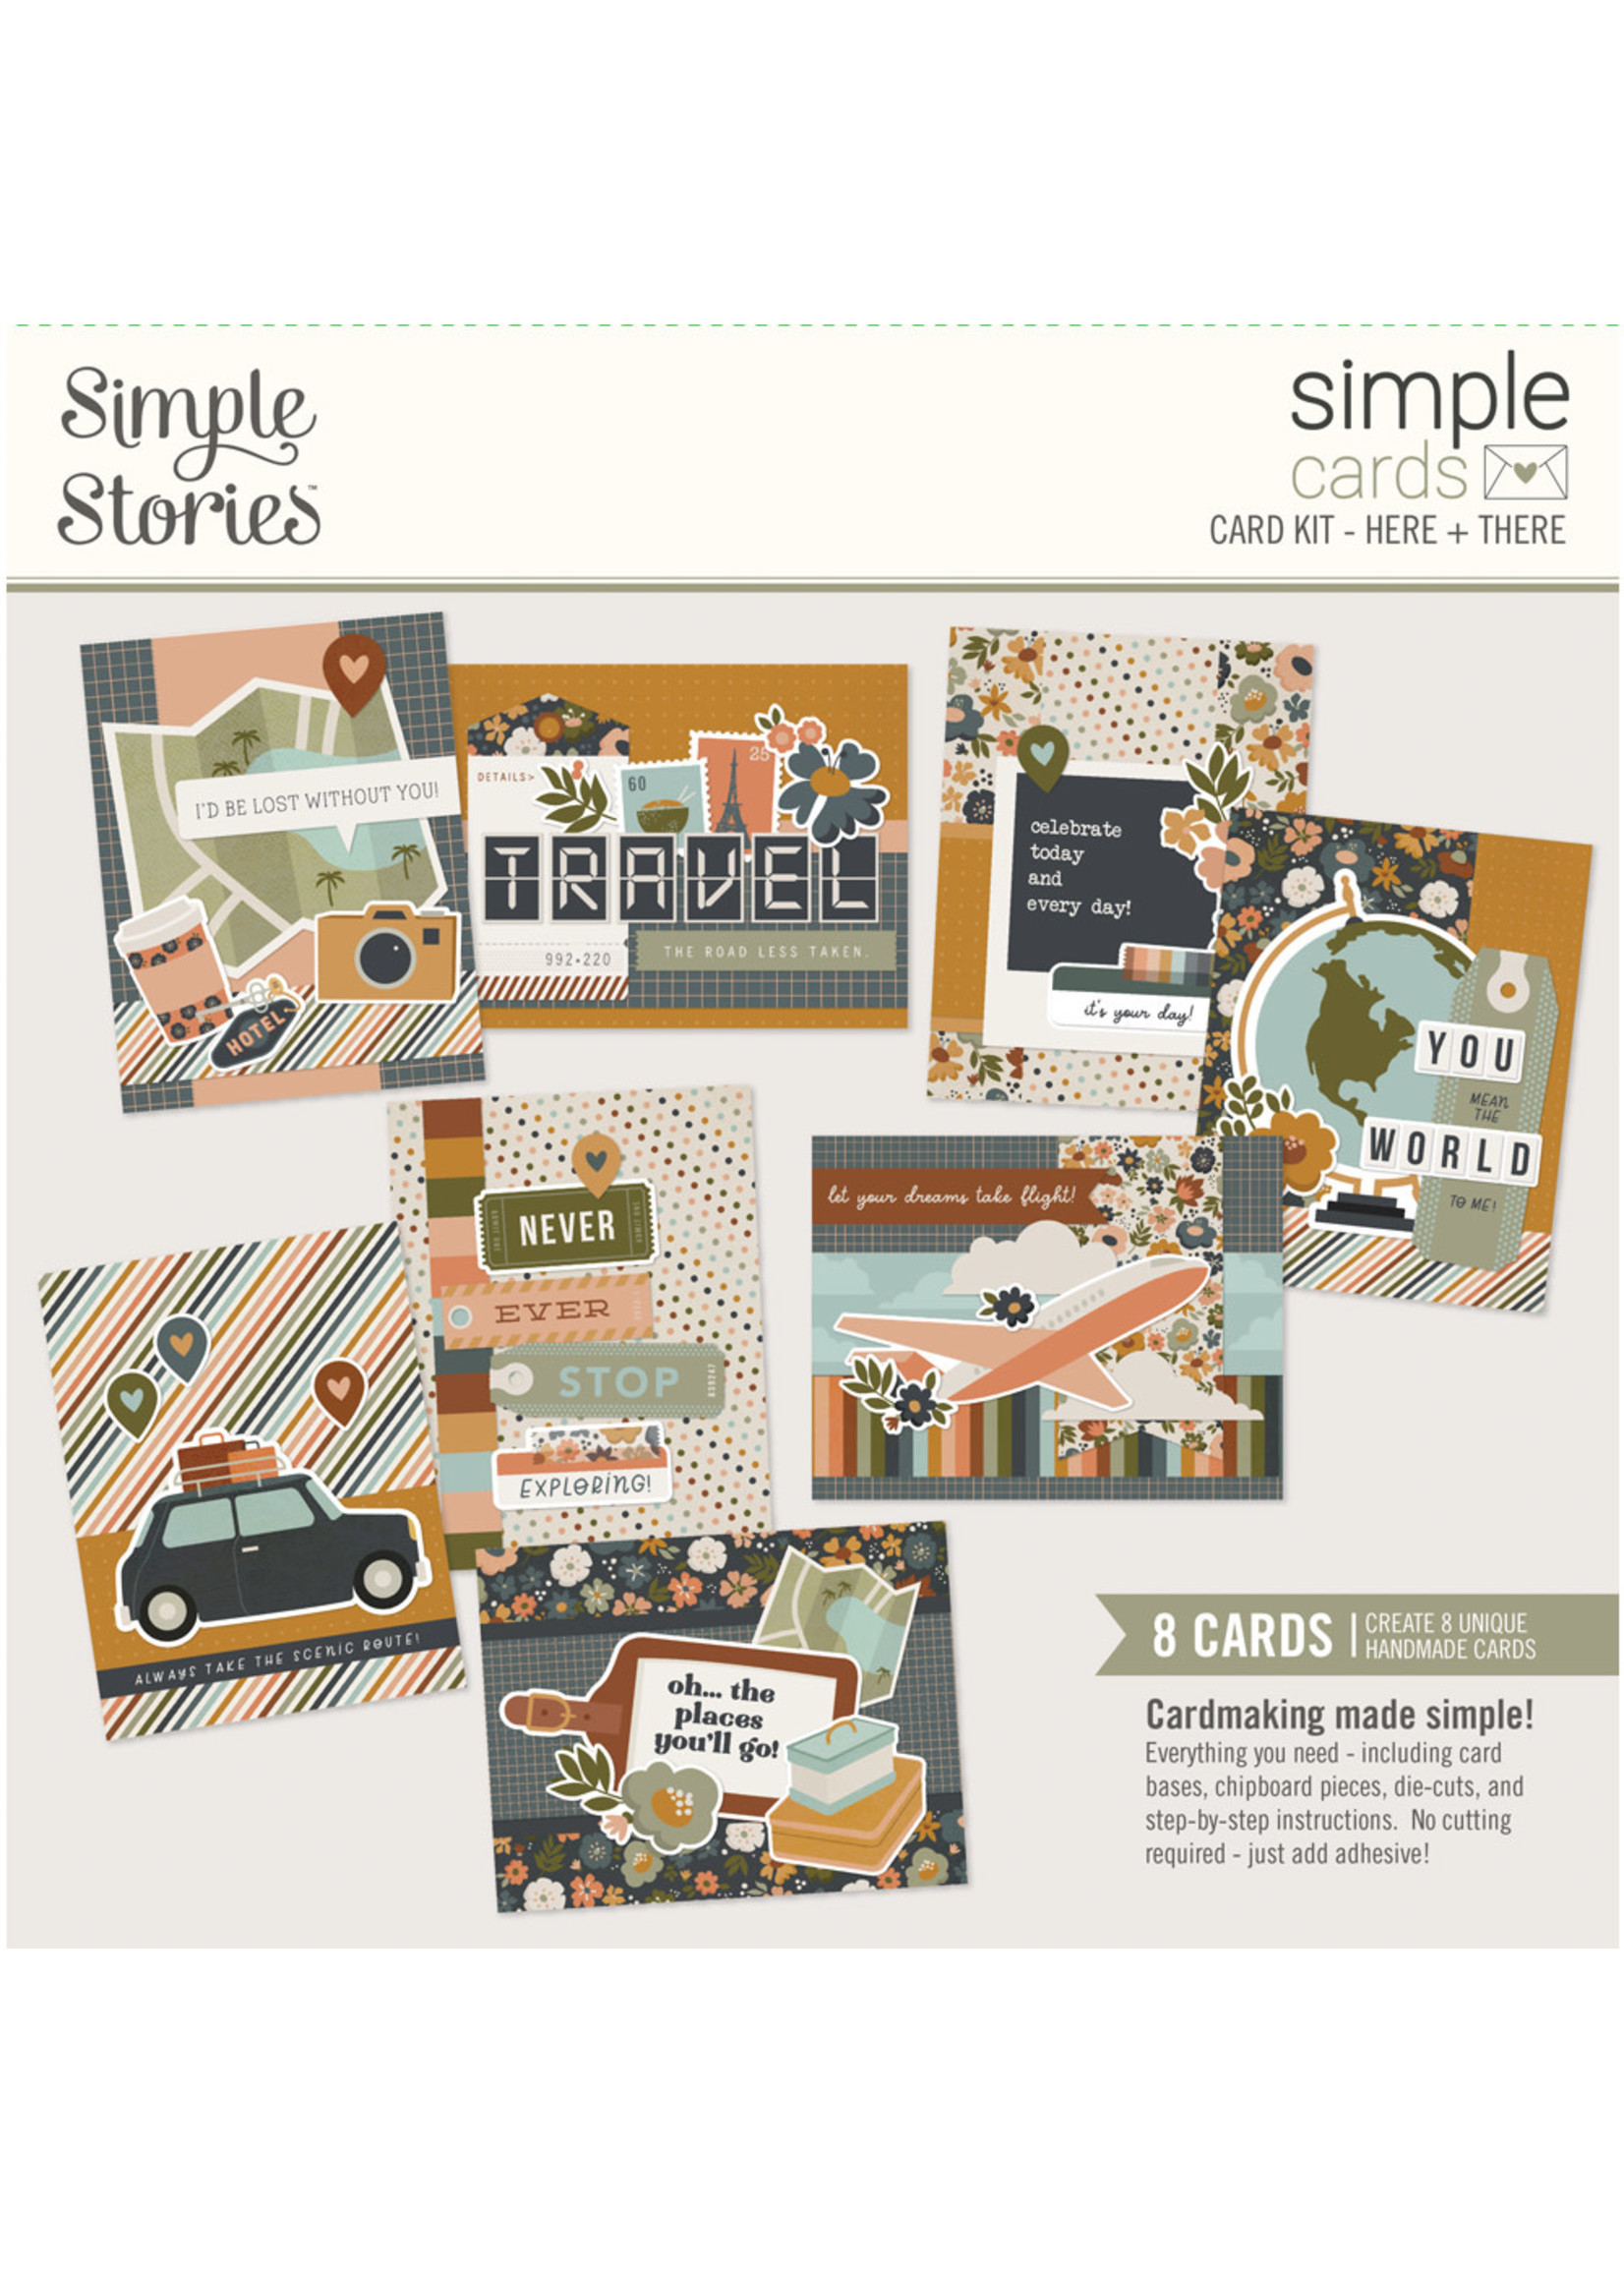 Simple Stories Here + There - Simple Cards Card Kit